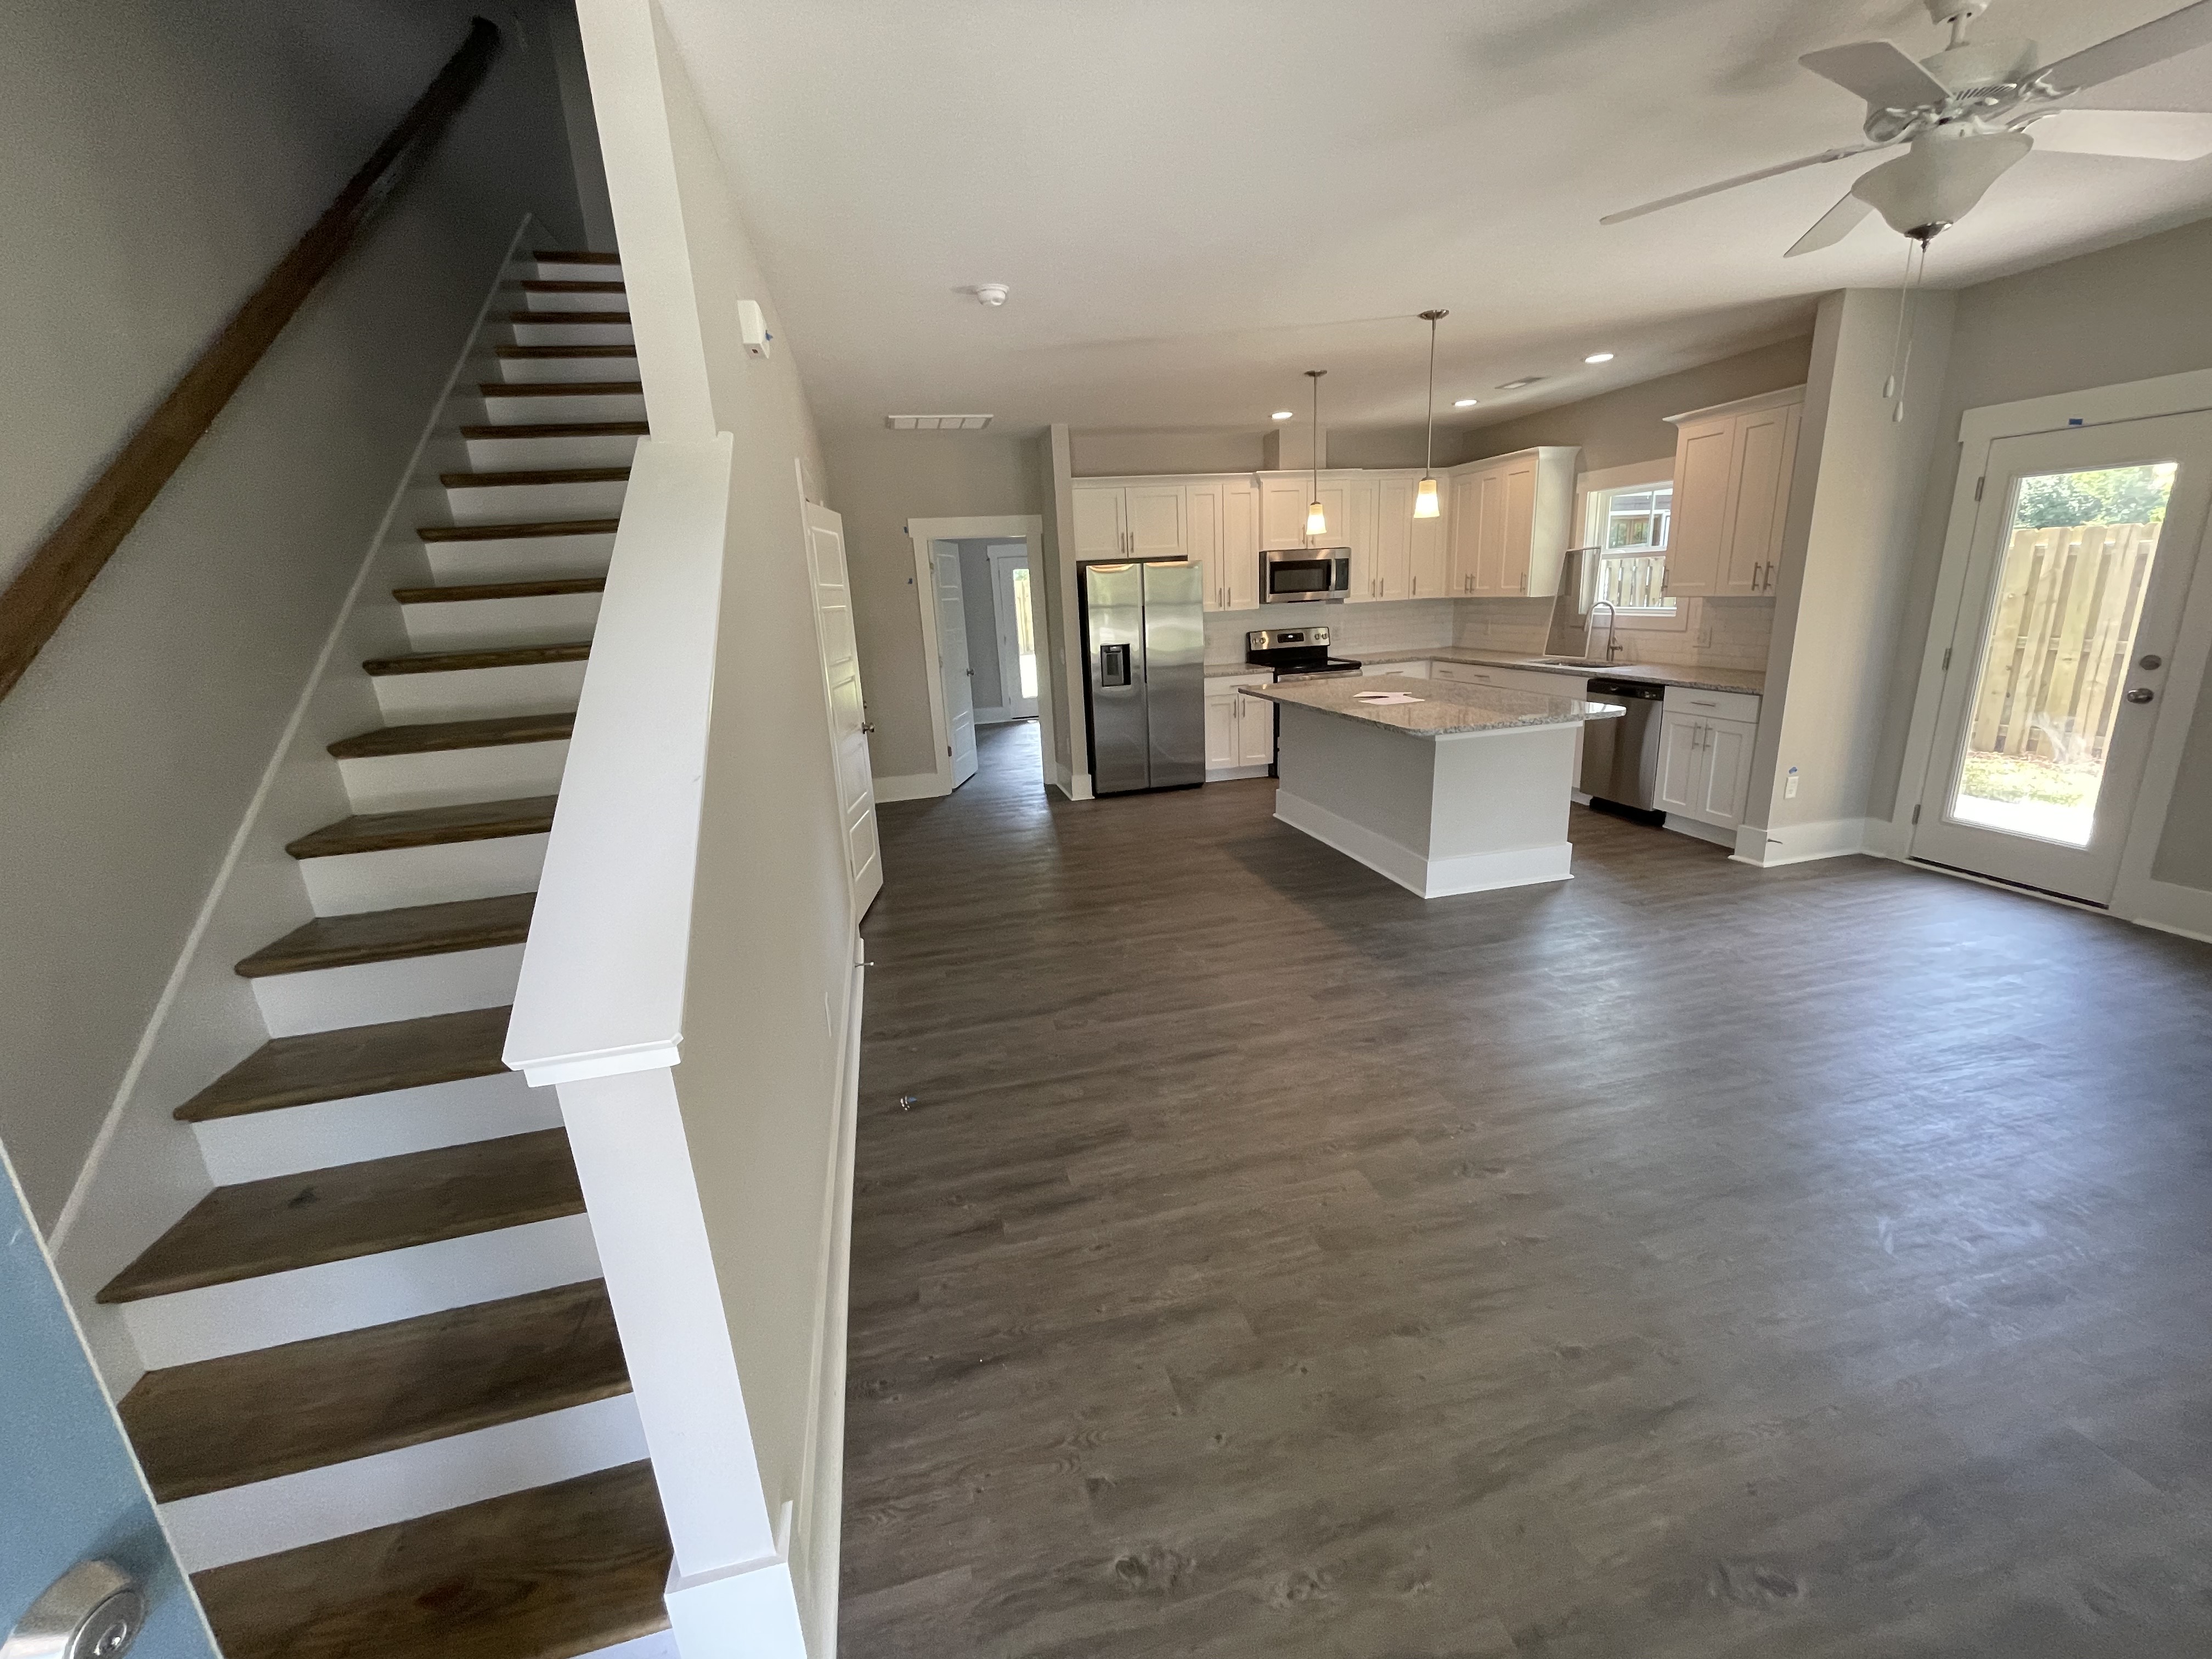 interior stairs living room and kitchen open floor plan; affordable housing property Arth Real Estate Wilmington North Carolina